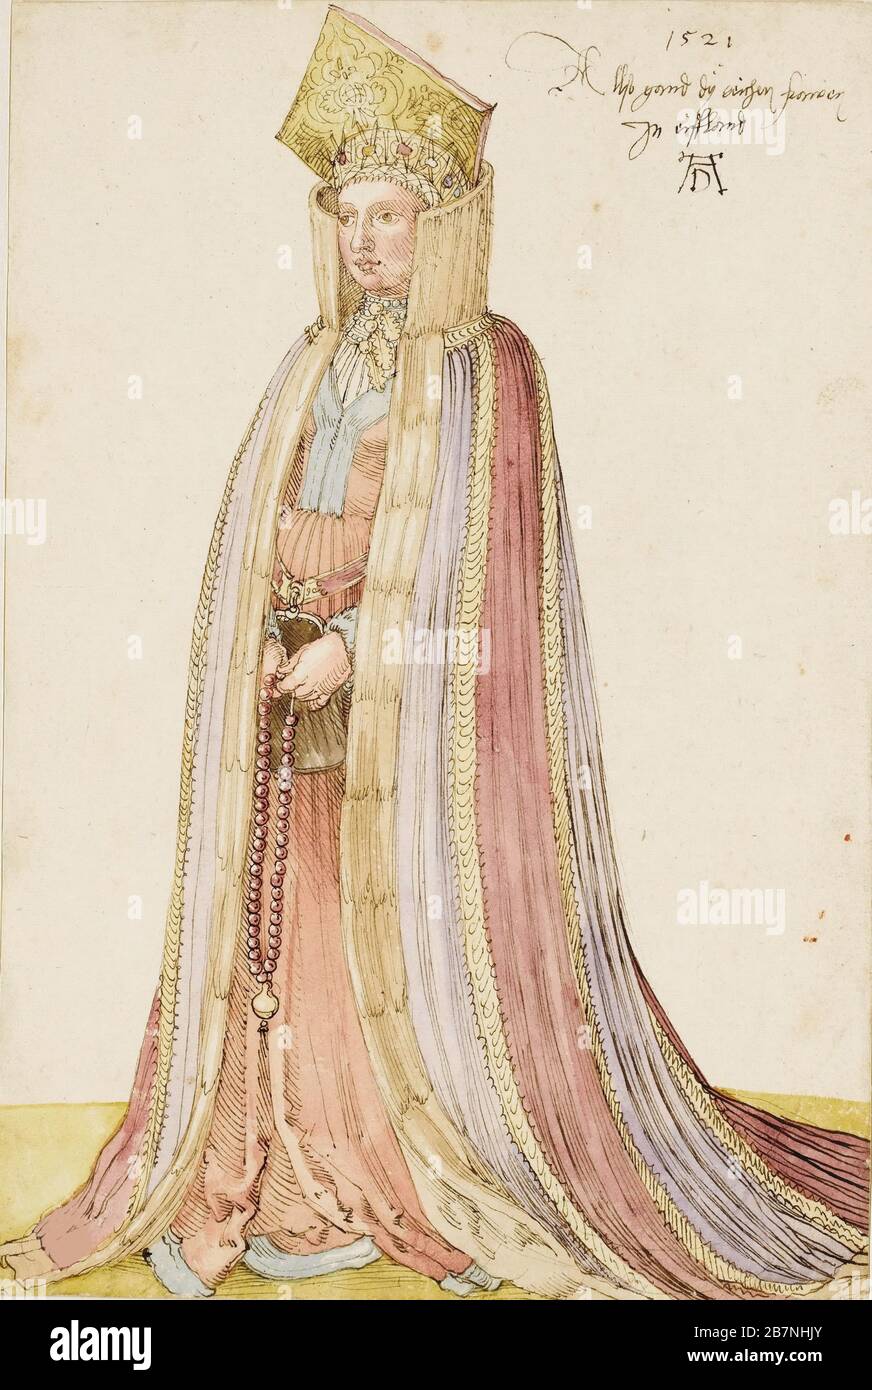 Livonian Lady, 1521. Found in the Collection of Mus&#xe9;e du Louvre, Paris. Stock Photo